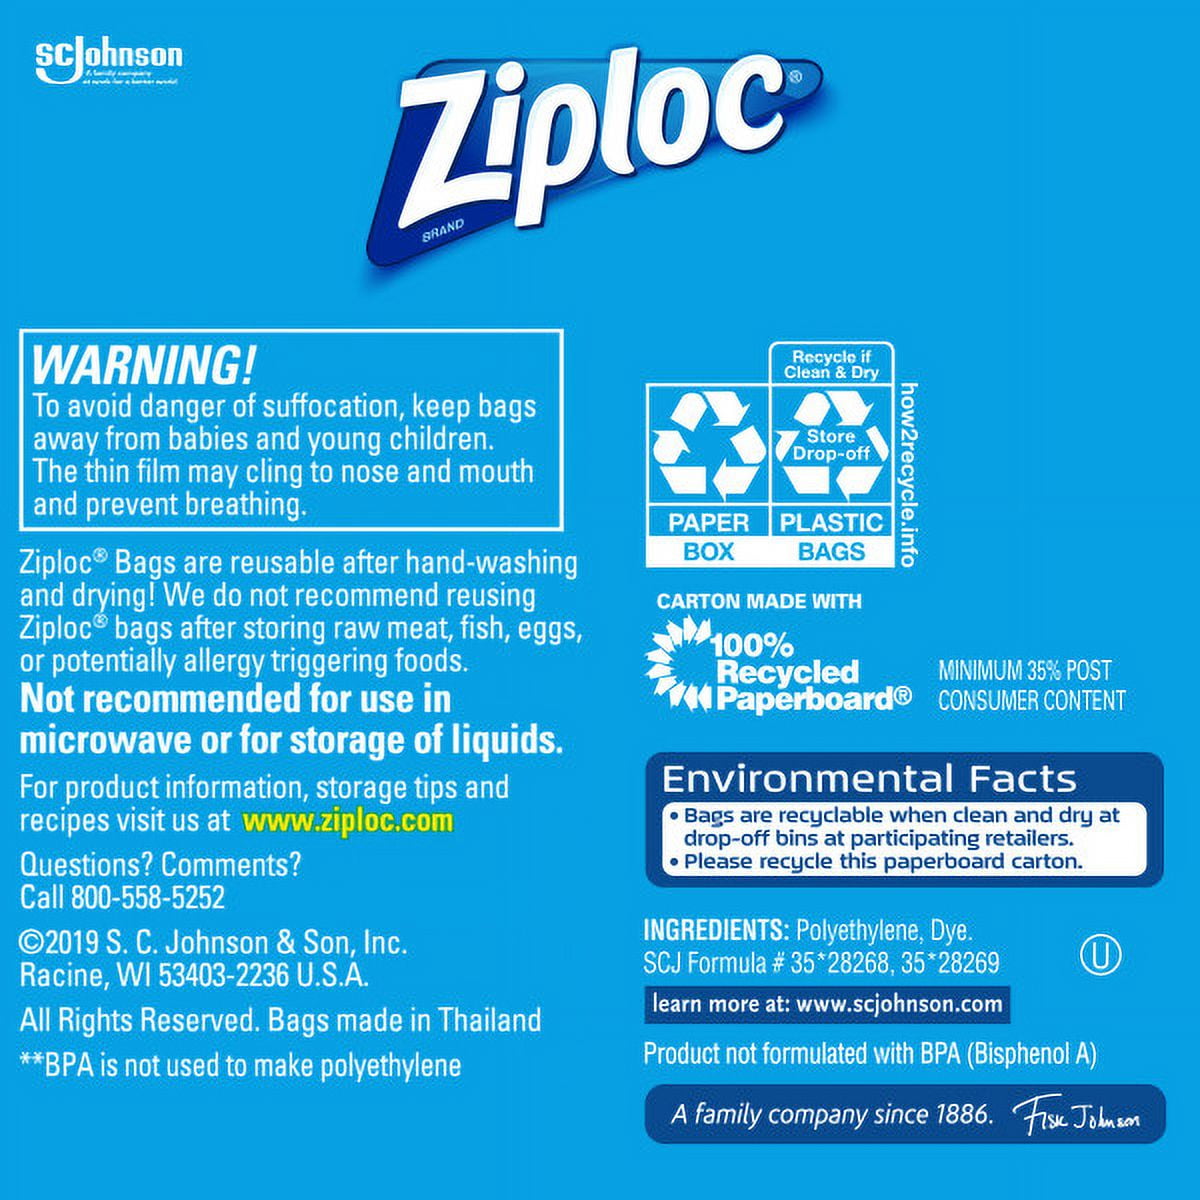 Ziploc 38-Pack Large Food Bag in the Food Storage Containers